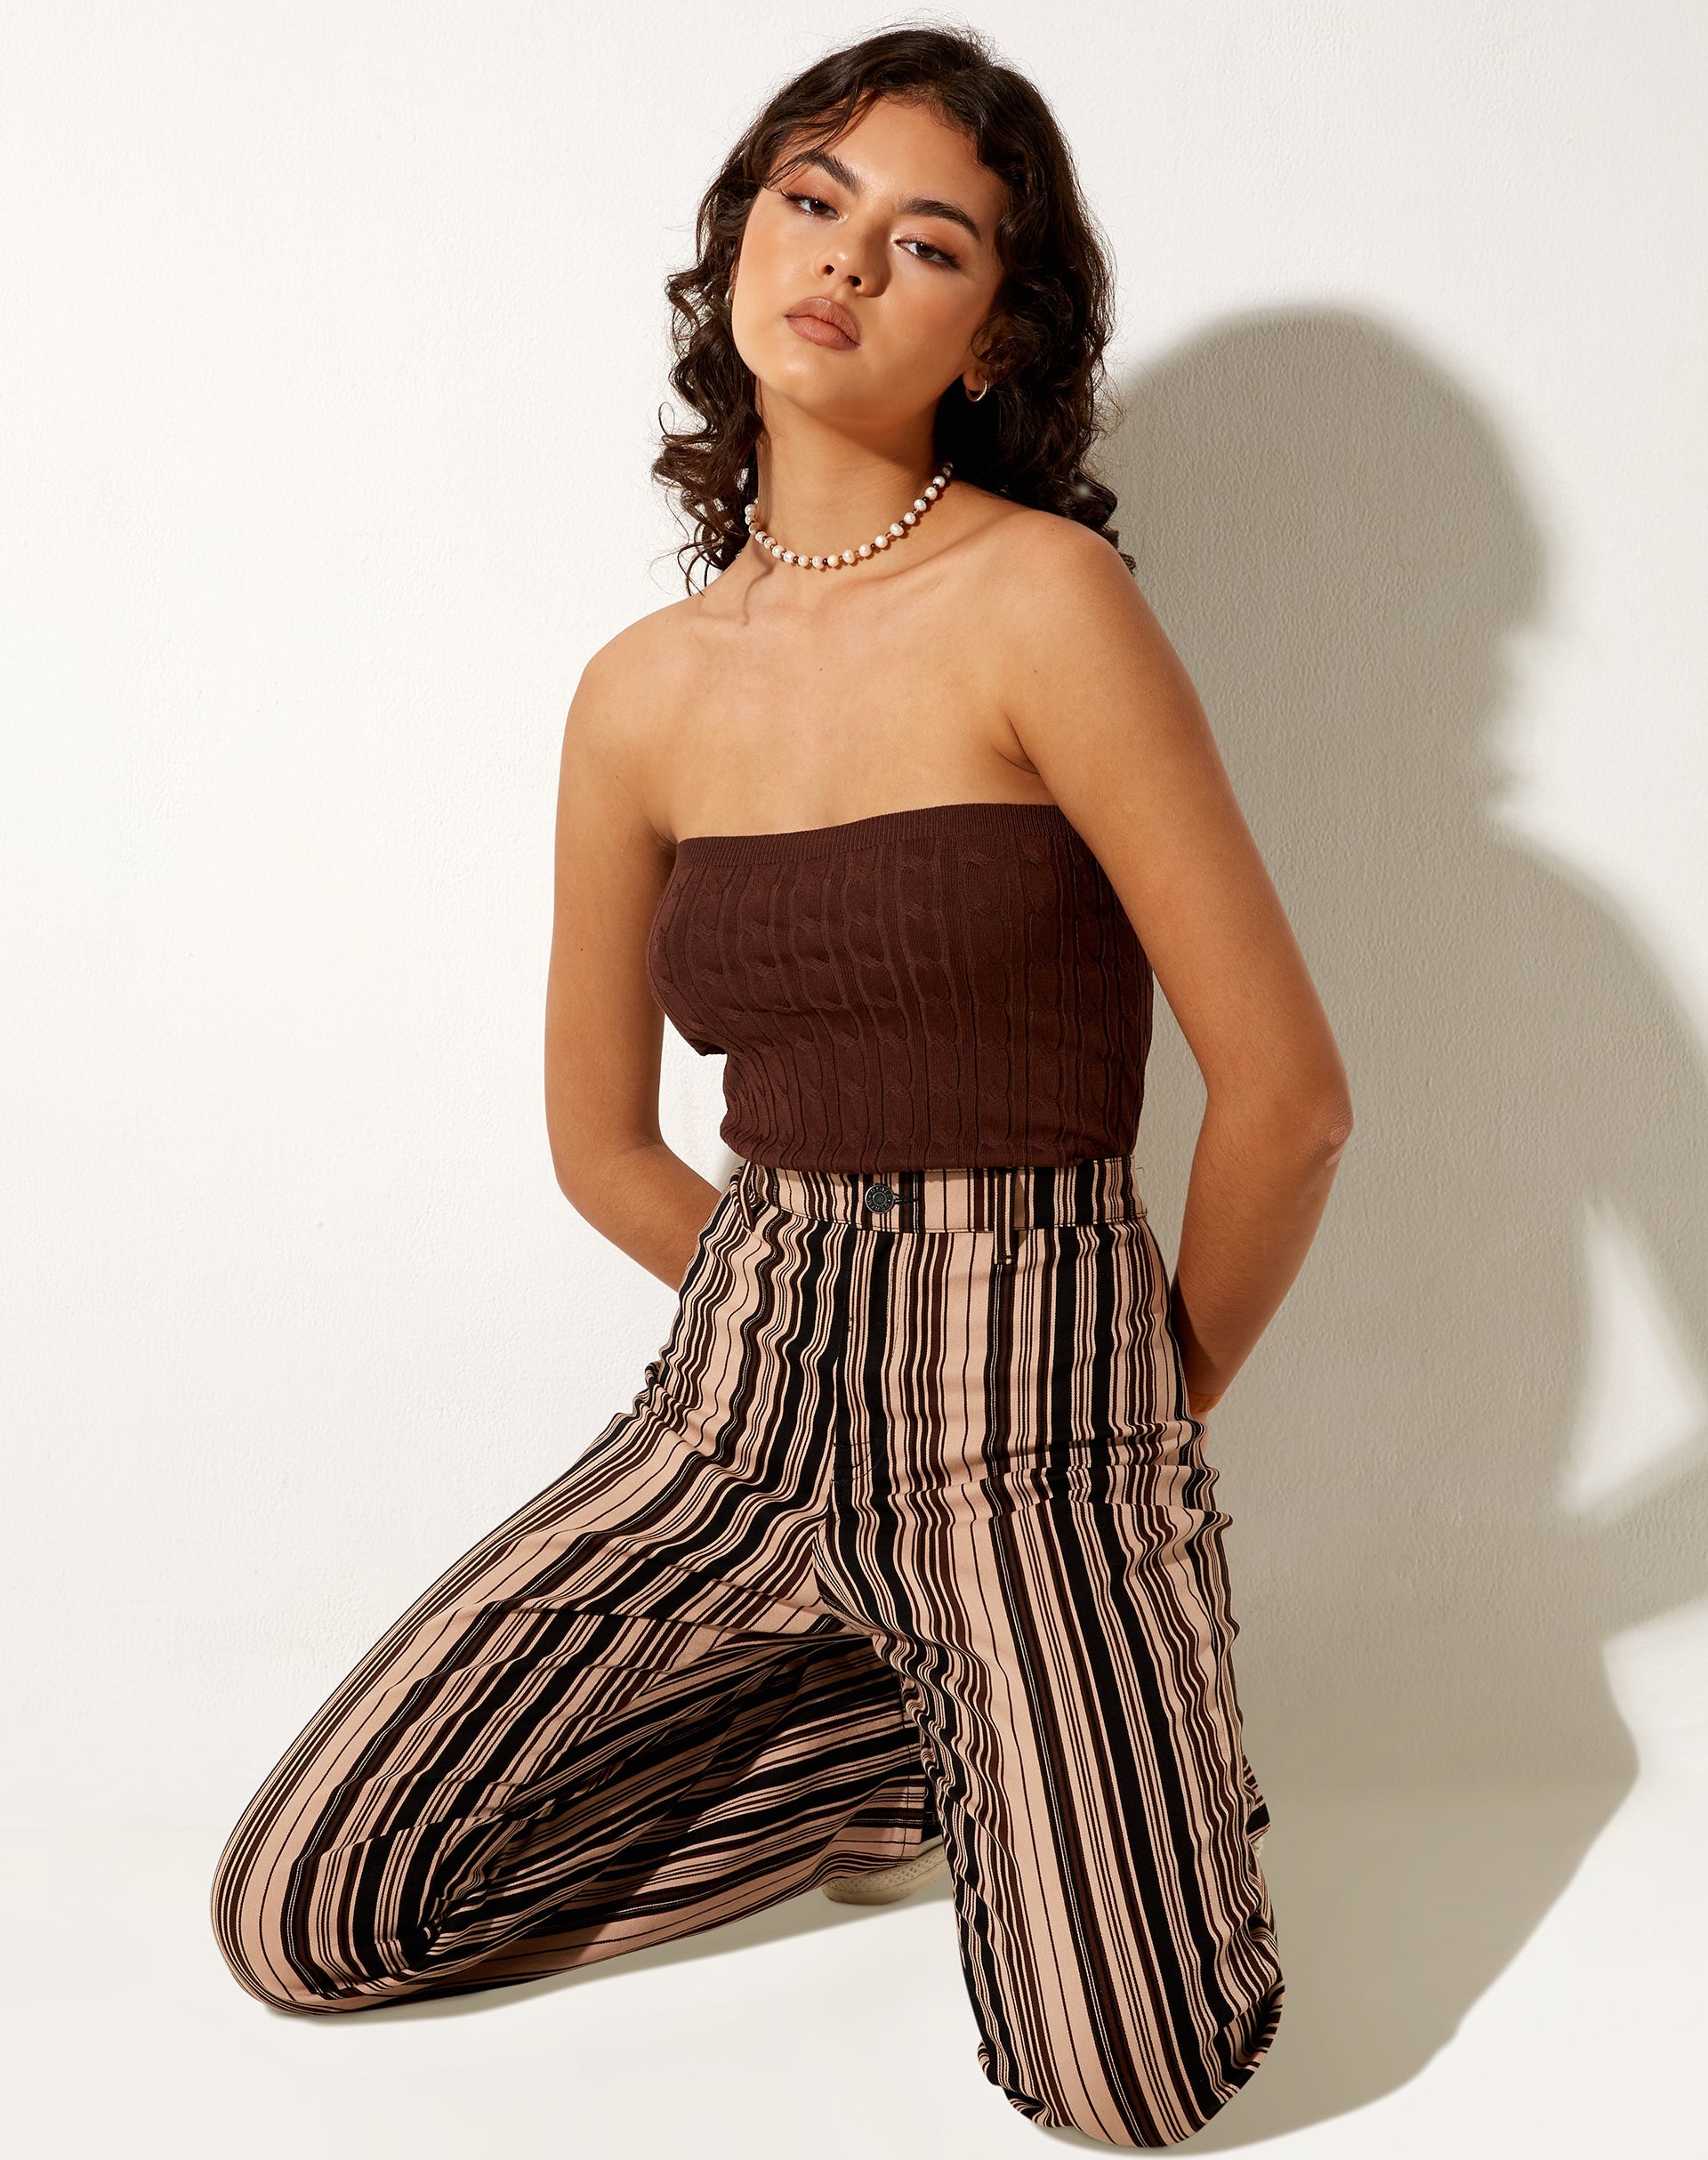 Image of Karen Bandeau Top in Knit Chocolate